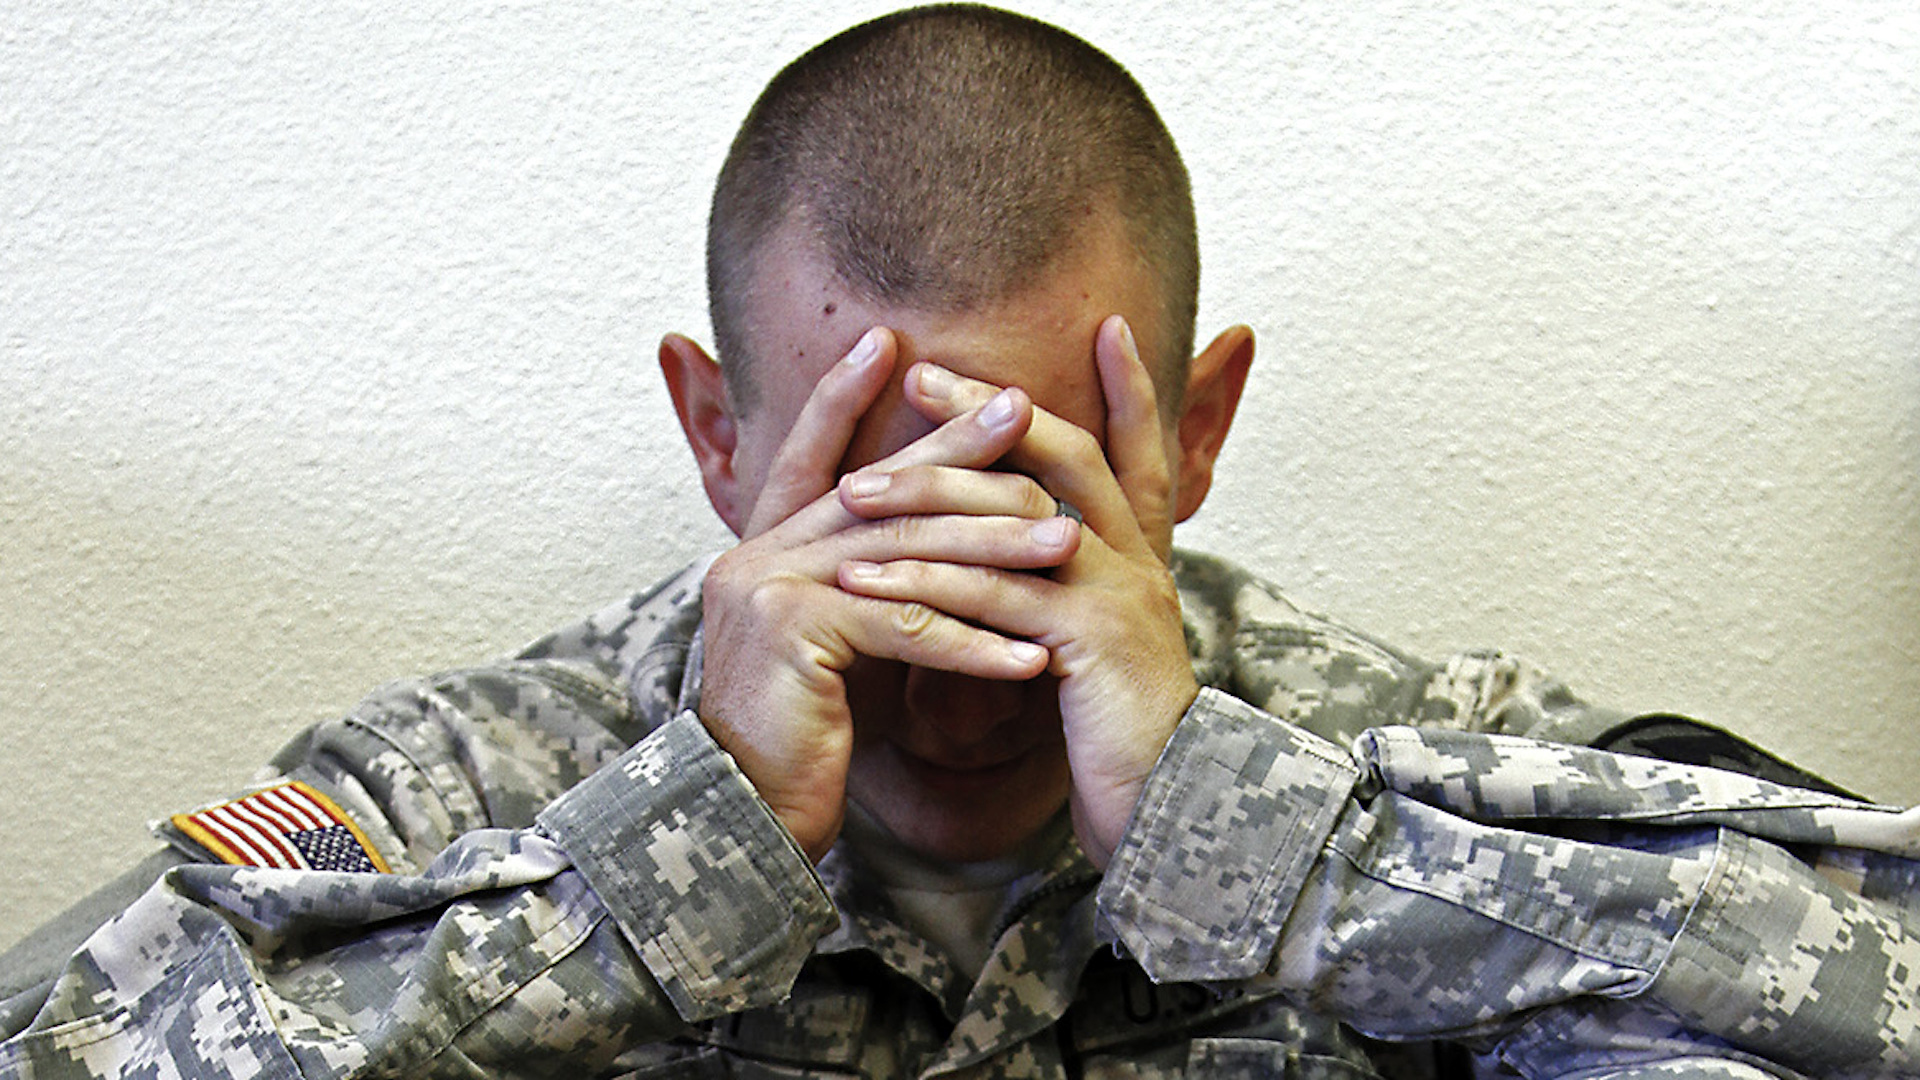 U.S. Army implements Brandon Act, giving soldiers new mental health options